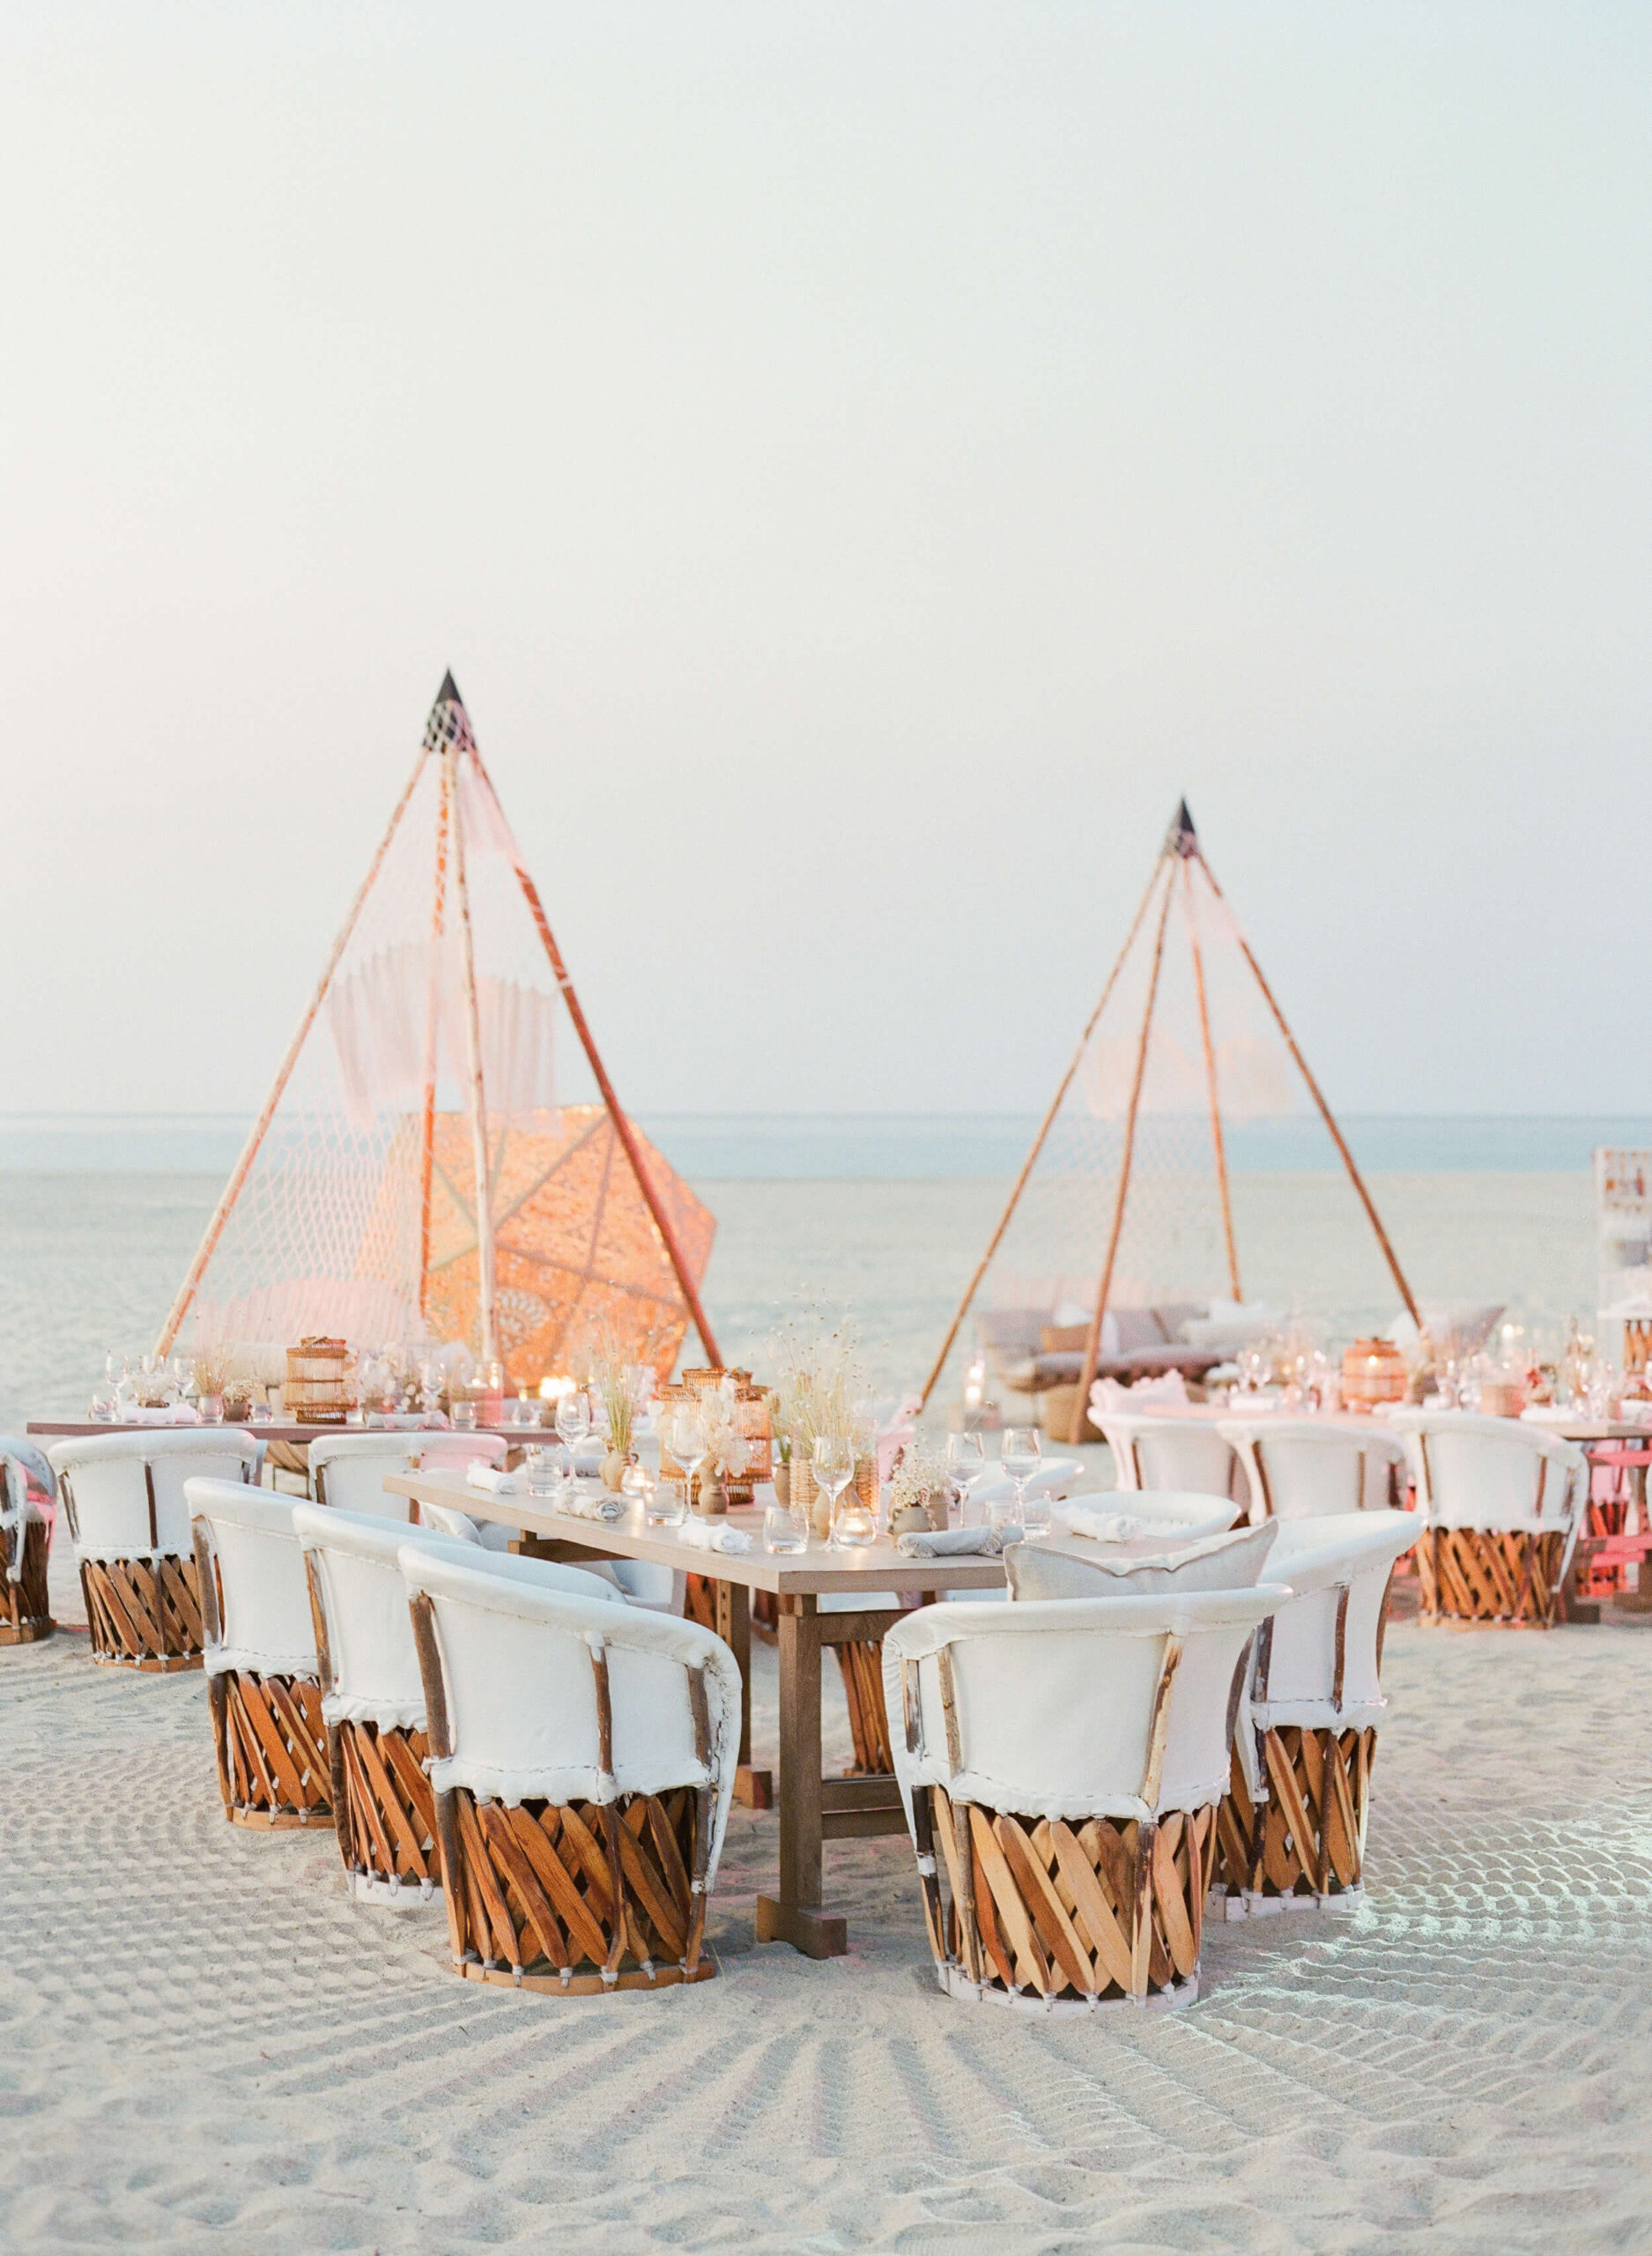 Custom structures and dining area on the beach